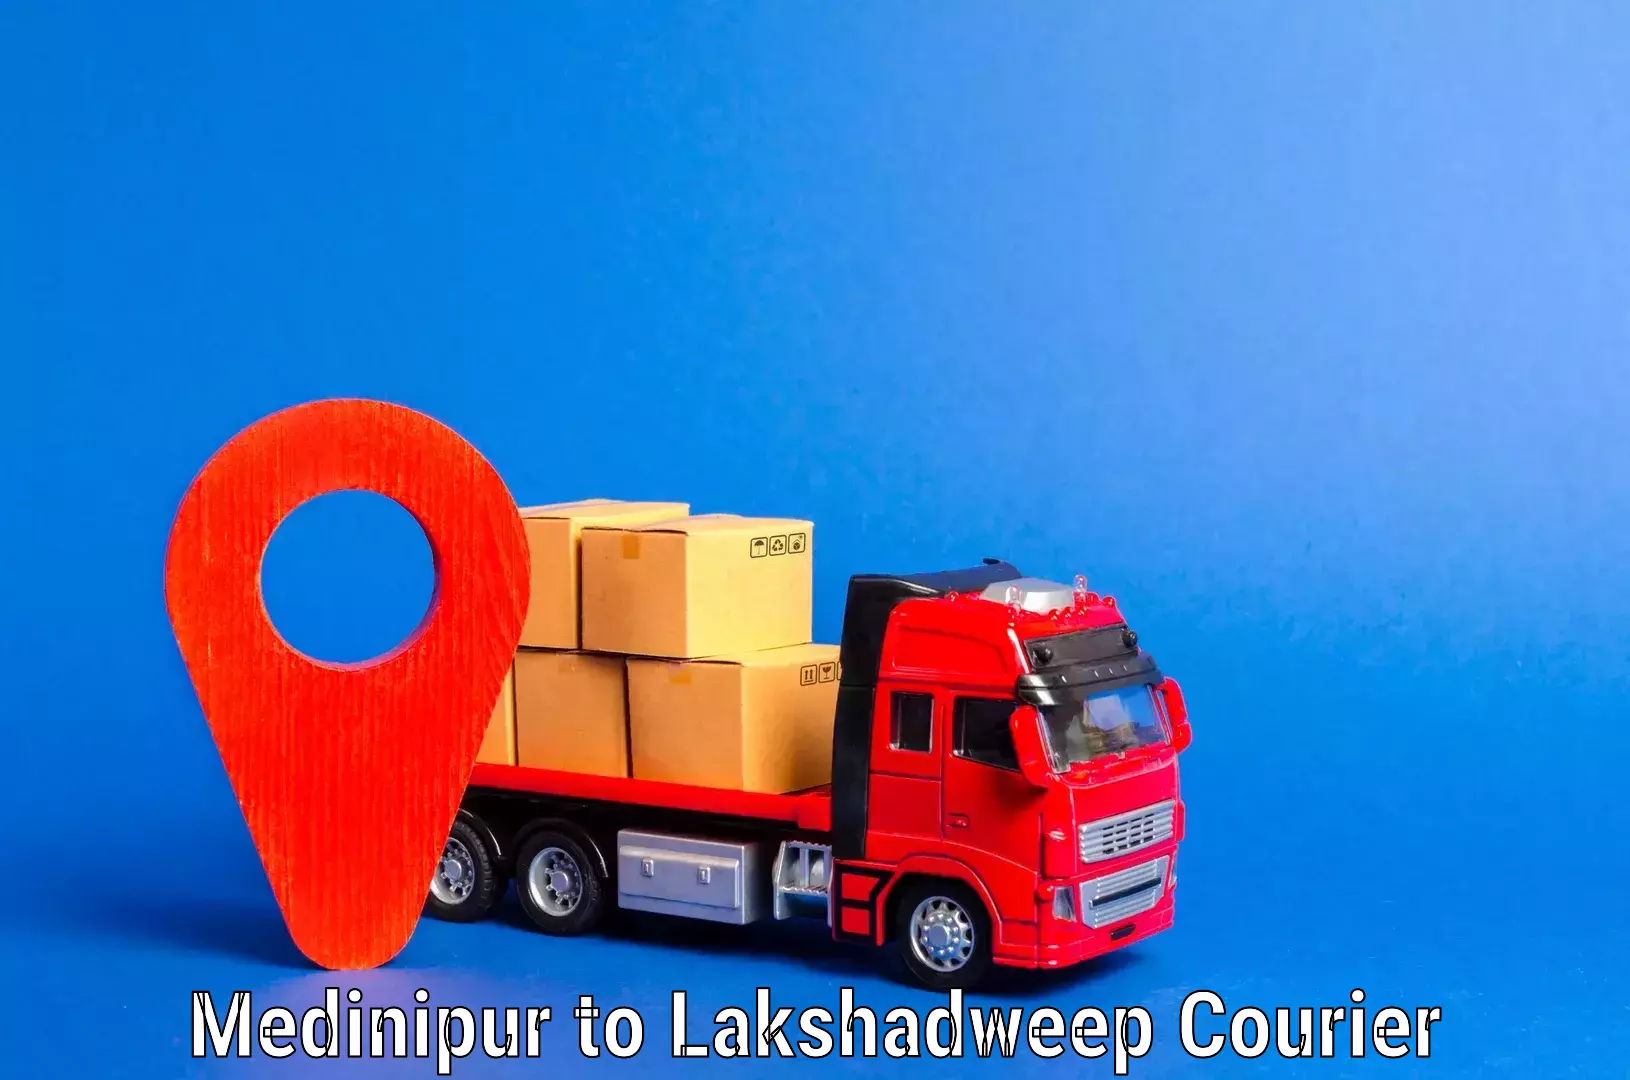 Full-service relocation in Medinipur to Lakshadweep